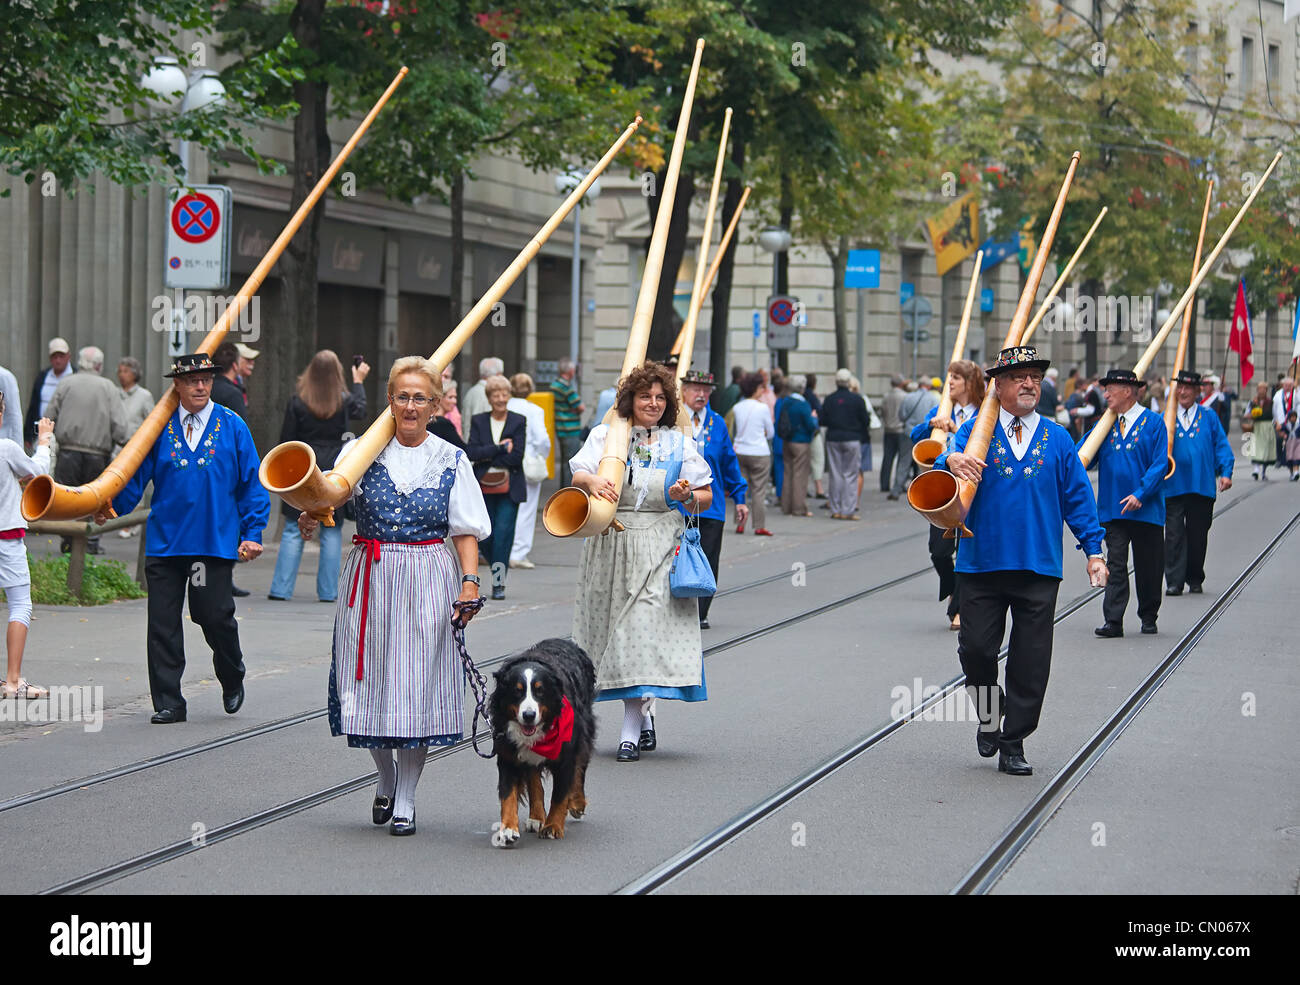 1st August costume parade in Zurich Stock Photo